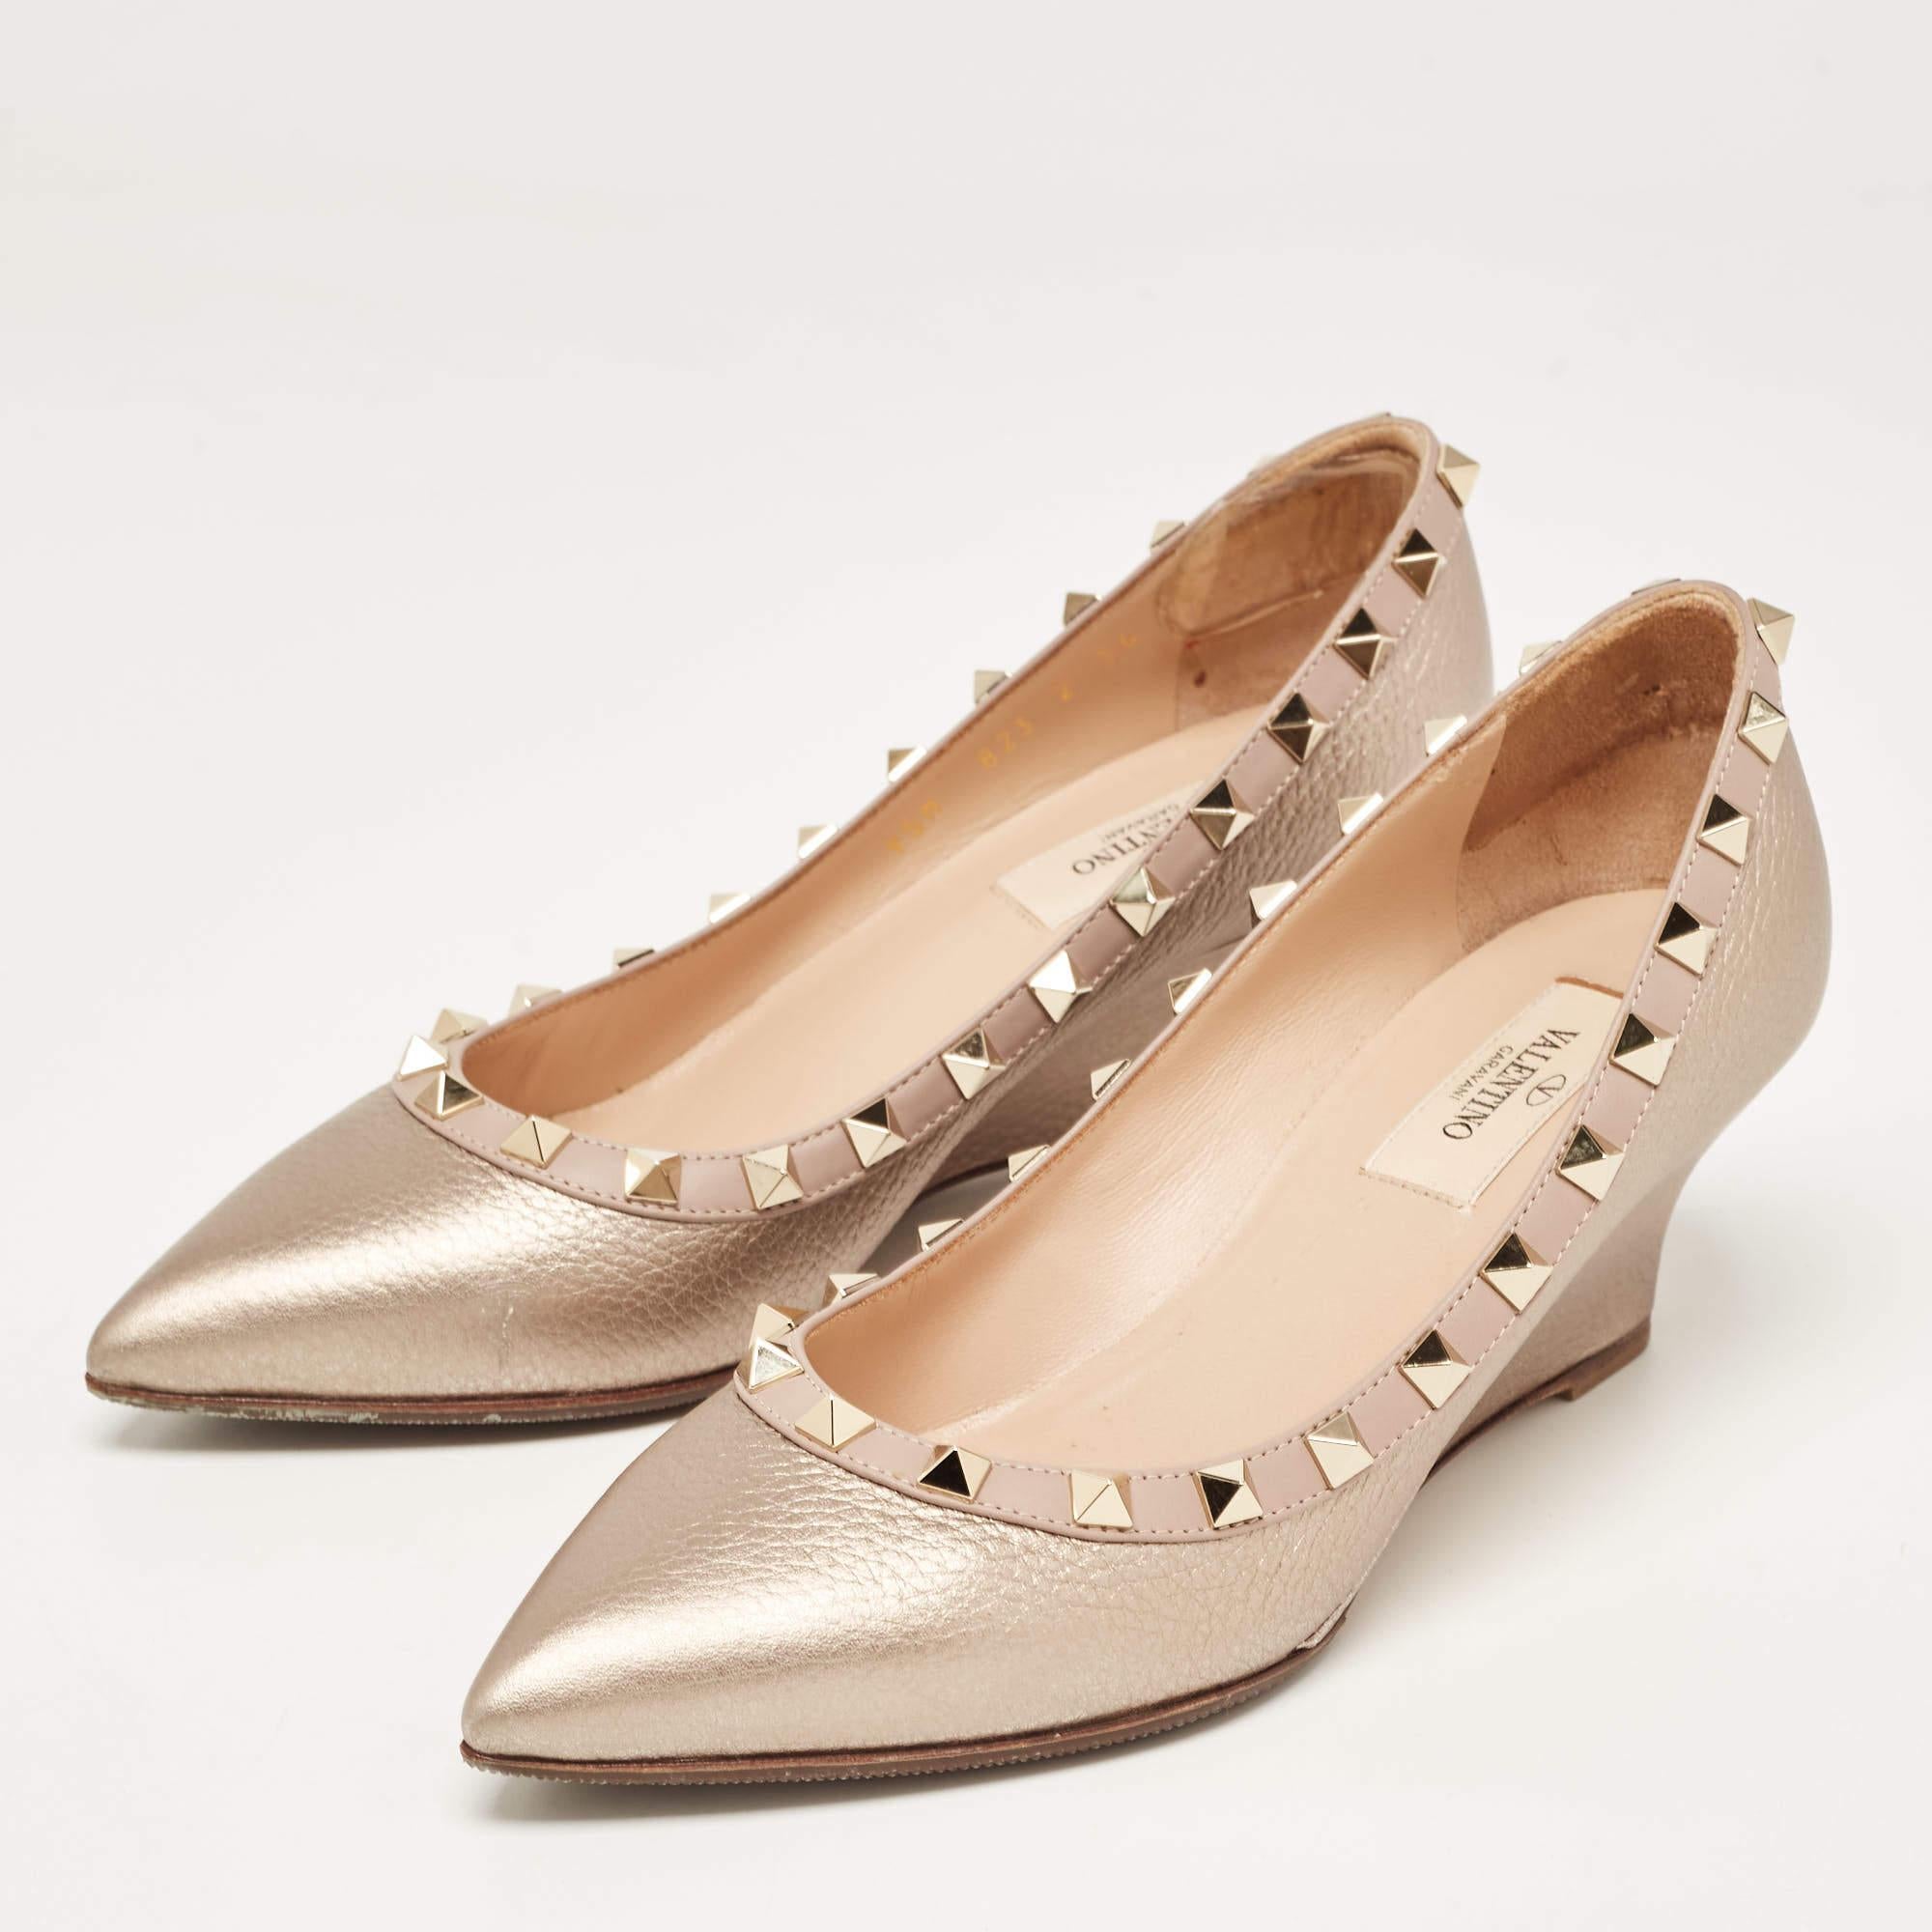 Valentino Metallic Leather Rockstud Pointed Toe Pumps Size 36 For Sale 7